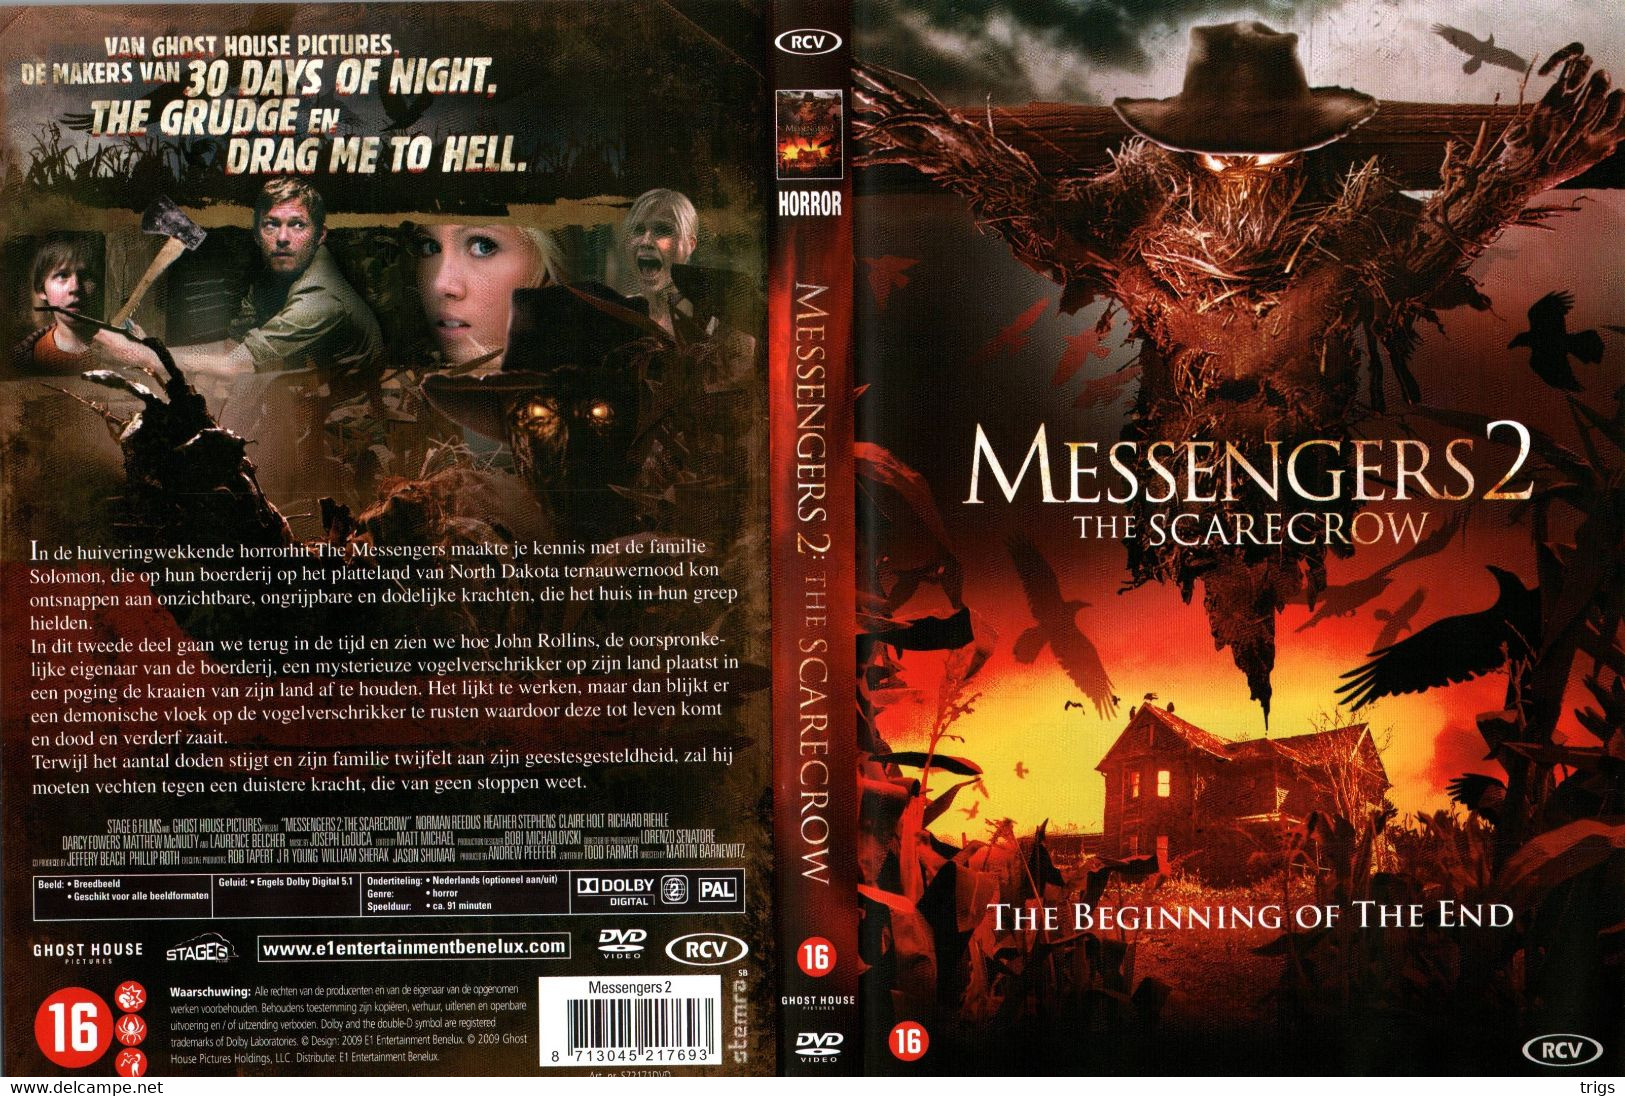 DVD - The Messengers 2: The Scarecrow - Horror